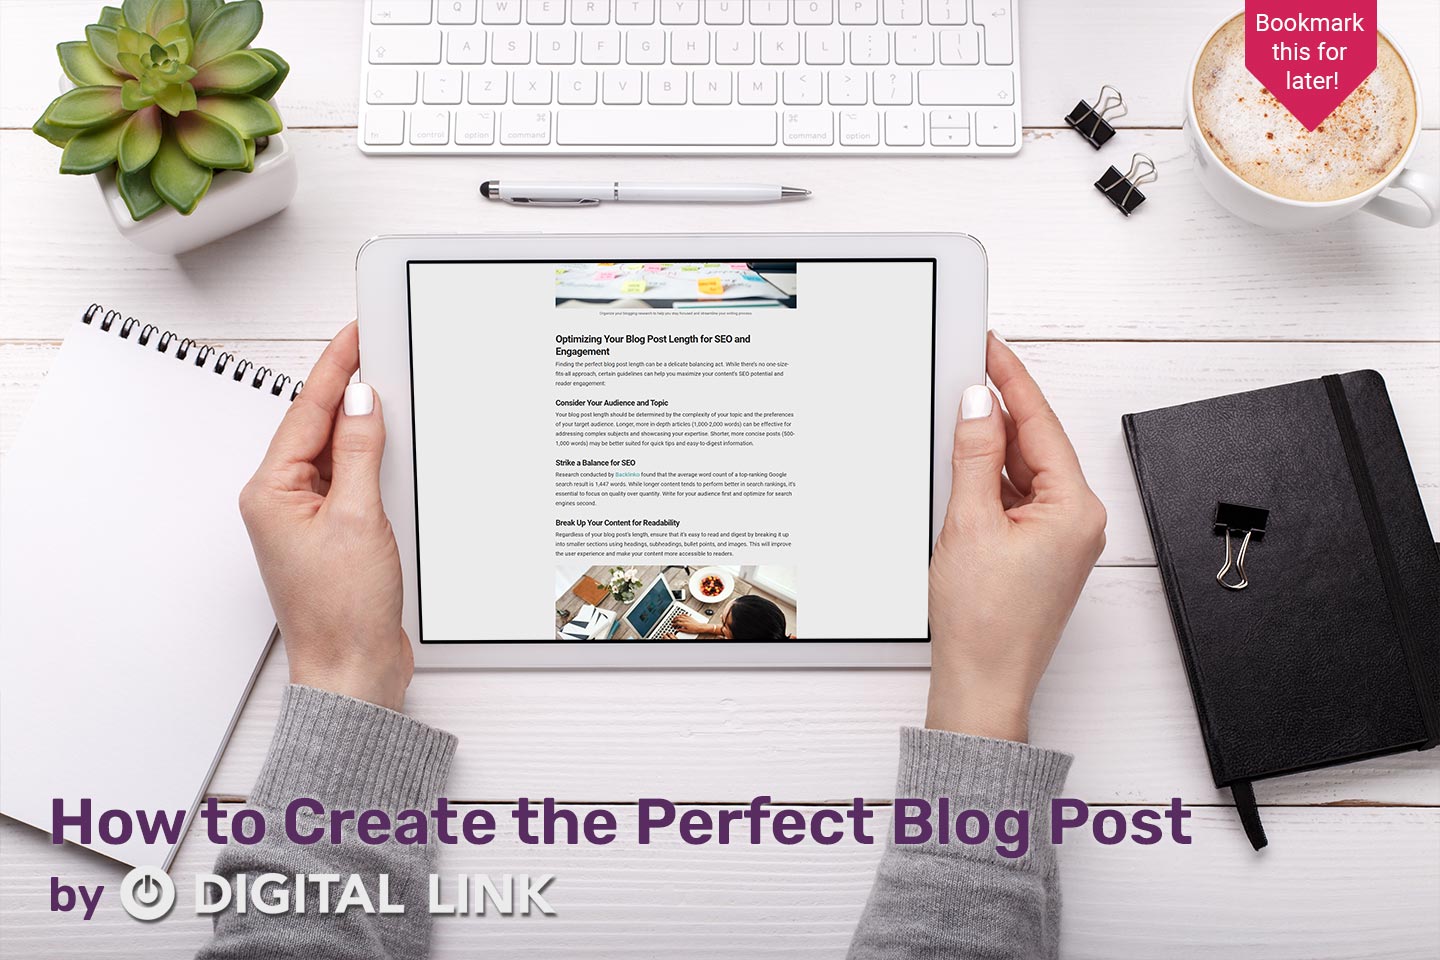 Tablet with screenshot of Digital Link blog showing how to create the perfect blog post